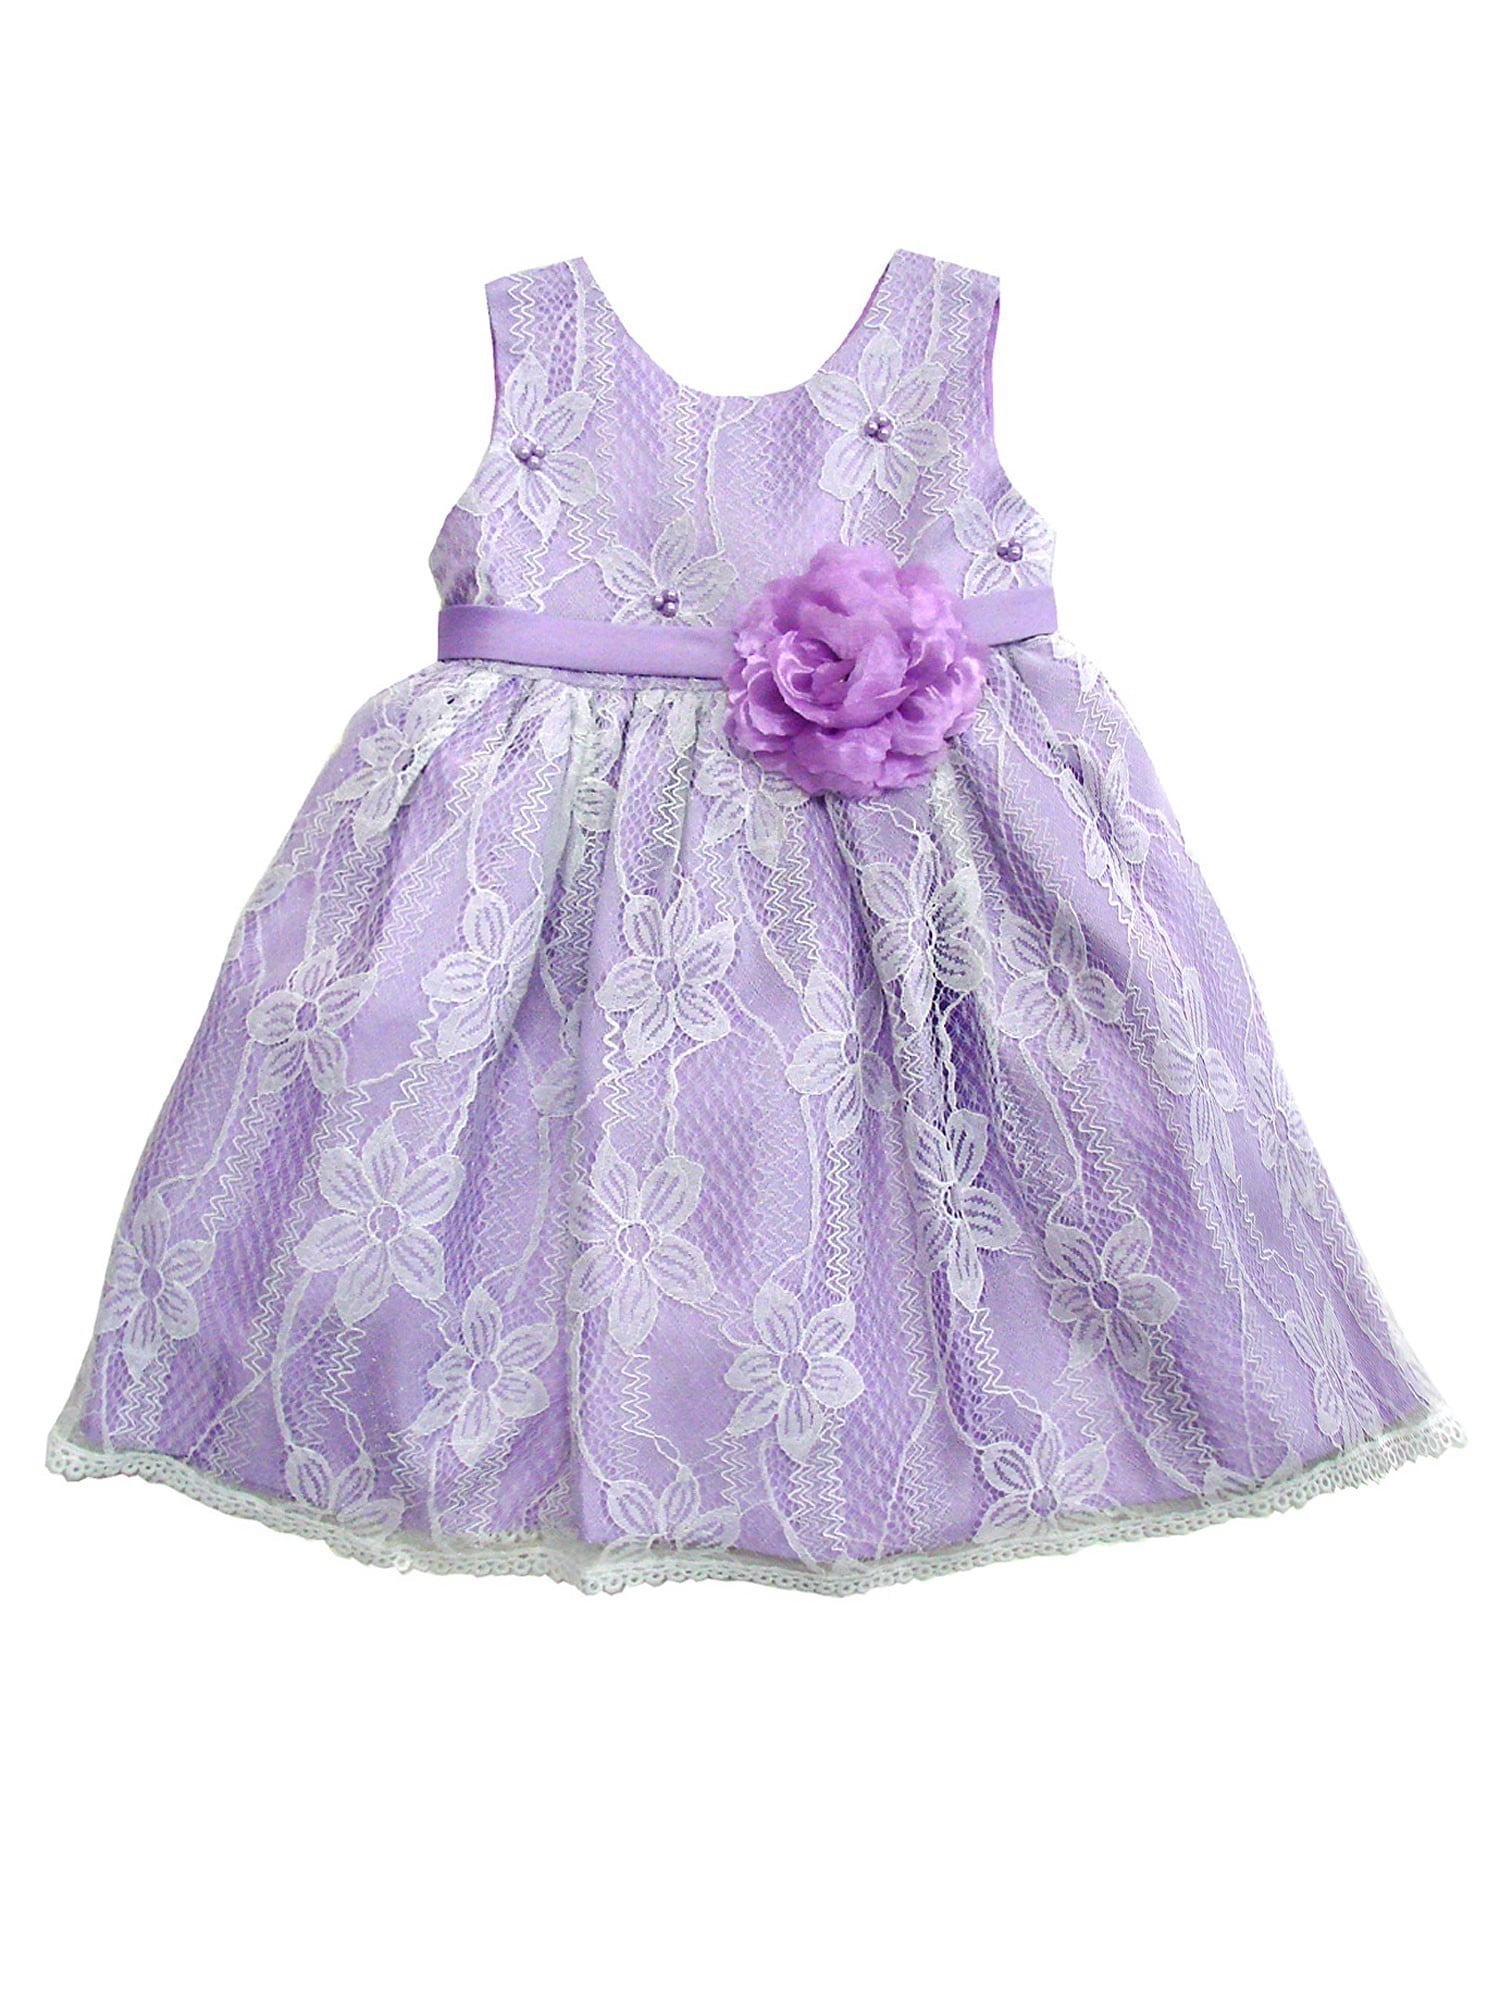 S. Square - S. Square Baby Girls Lilac Mesh Lace Sash Flower Girl Dress ...